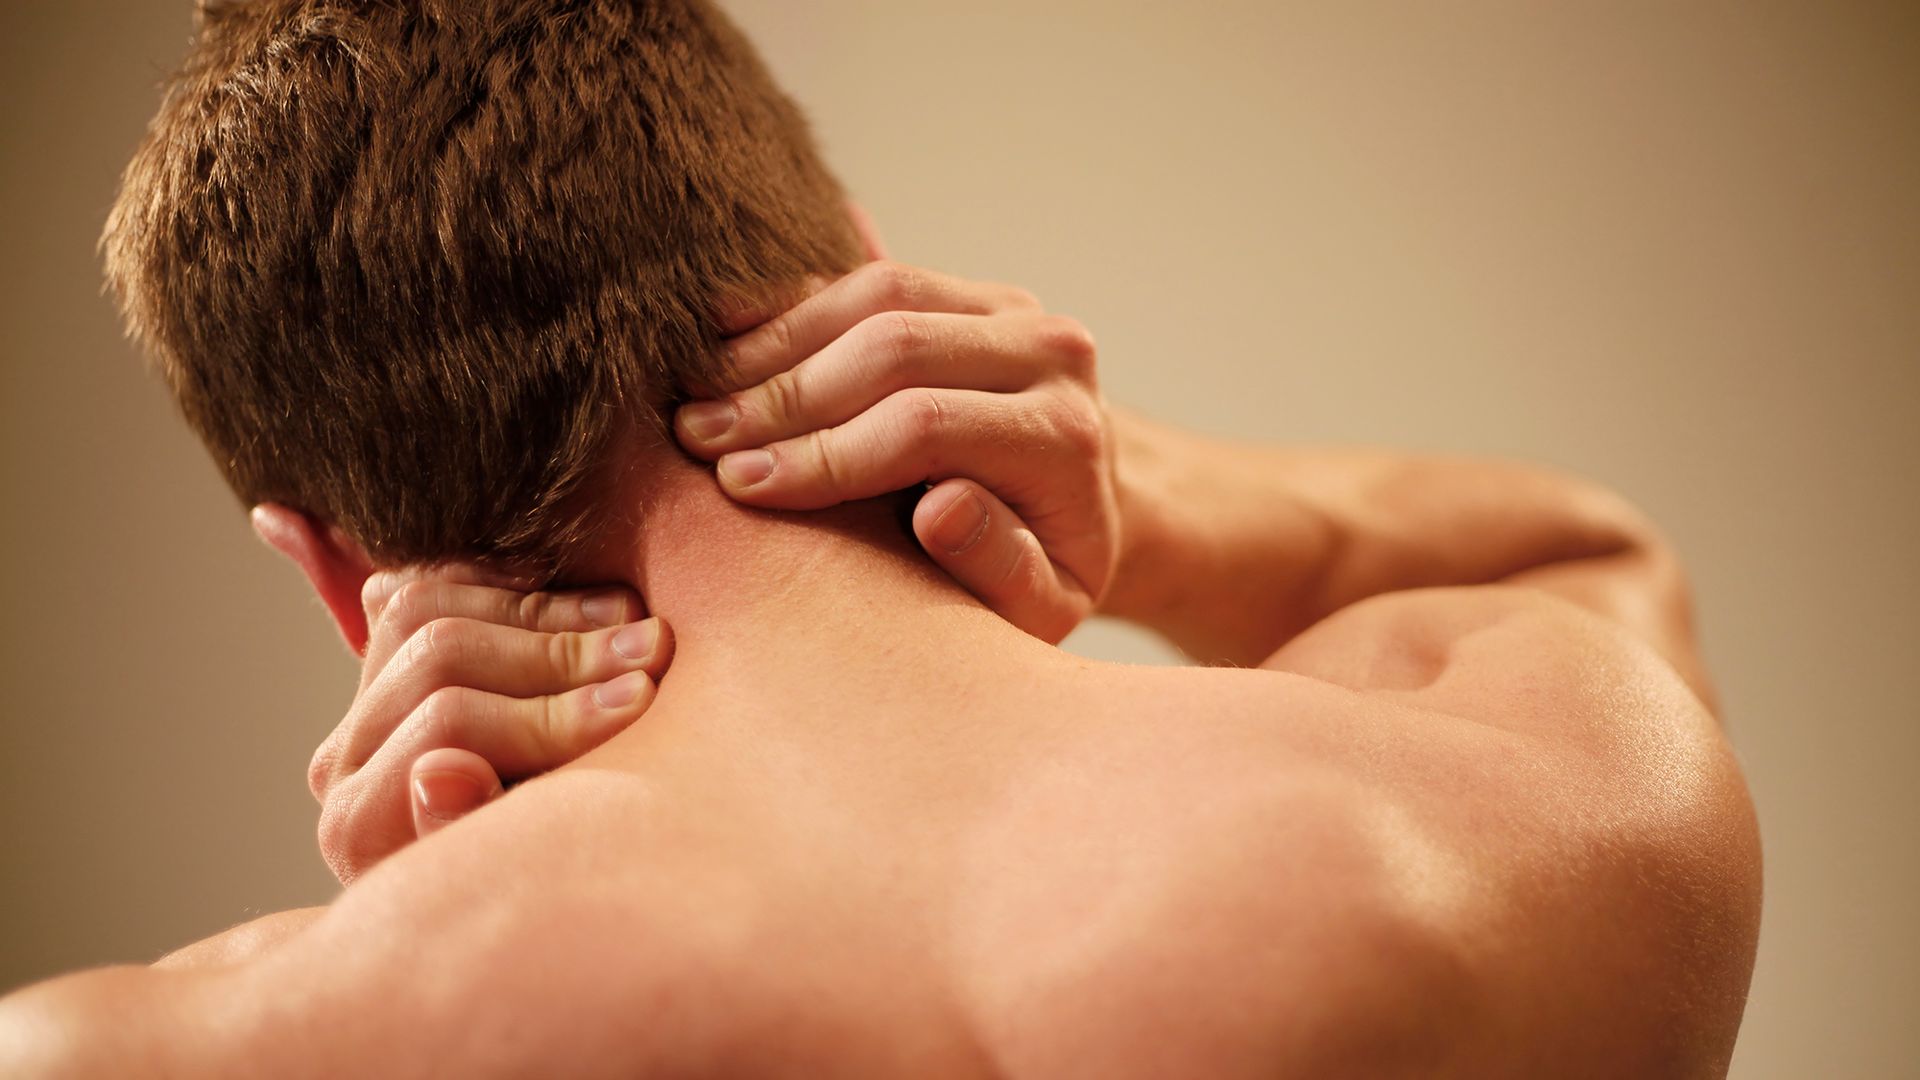 Man with Neck Pain - New Bloomfield, PA - Mulhollem Chiropractic Clinic